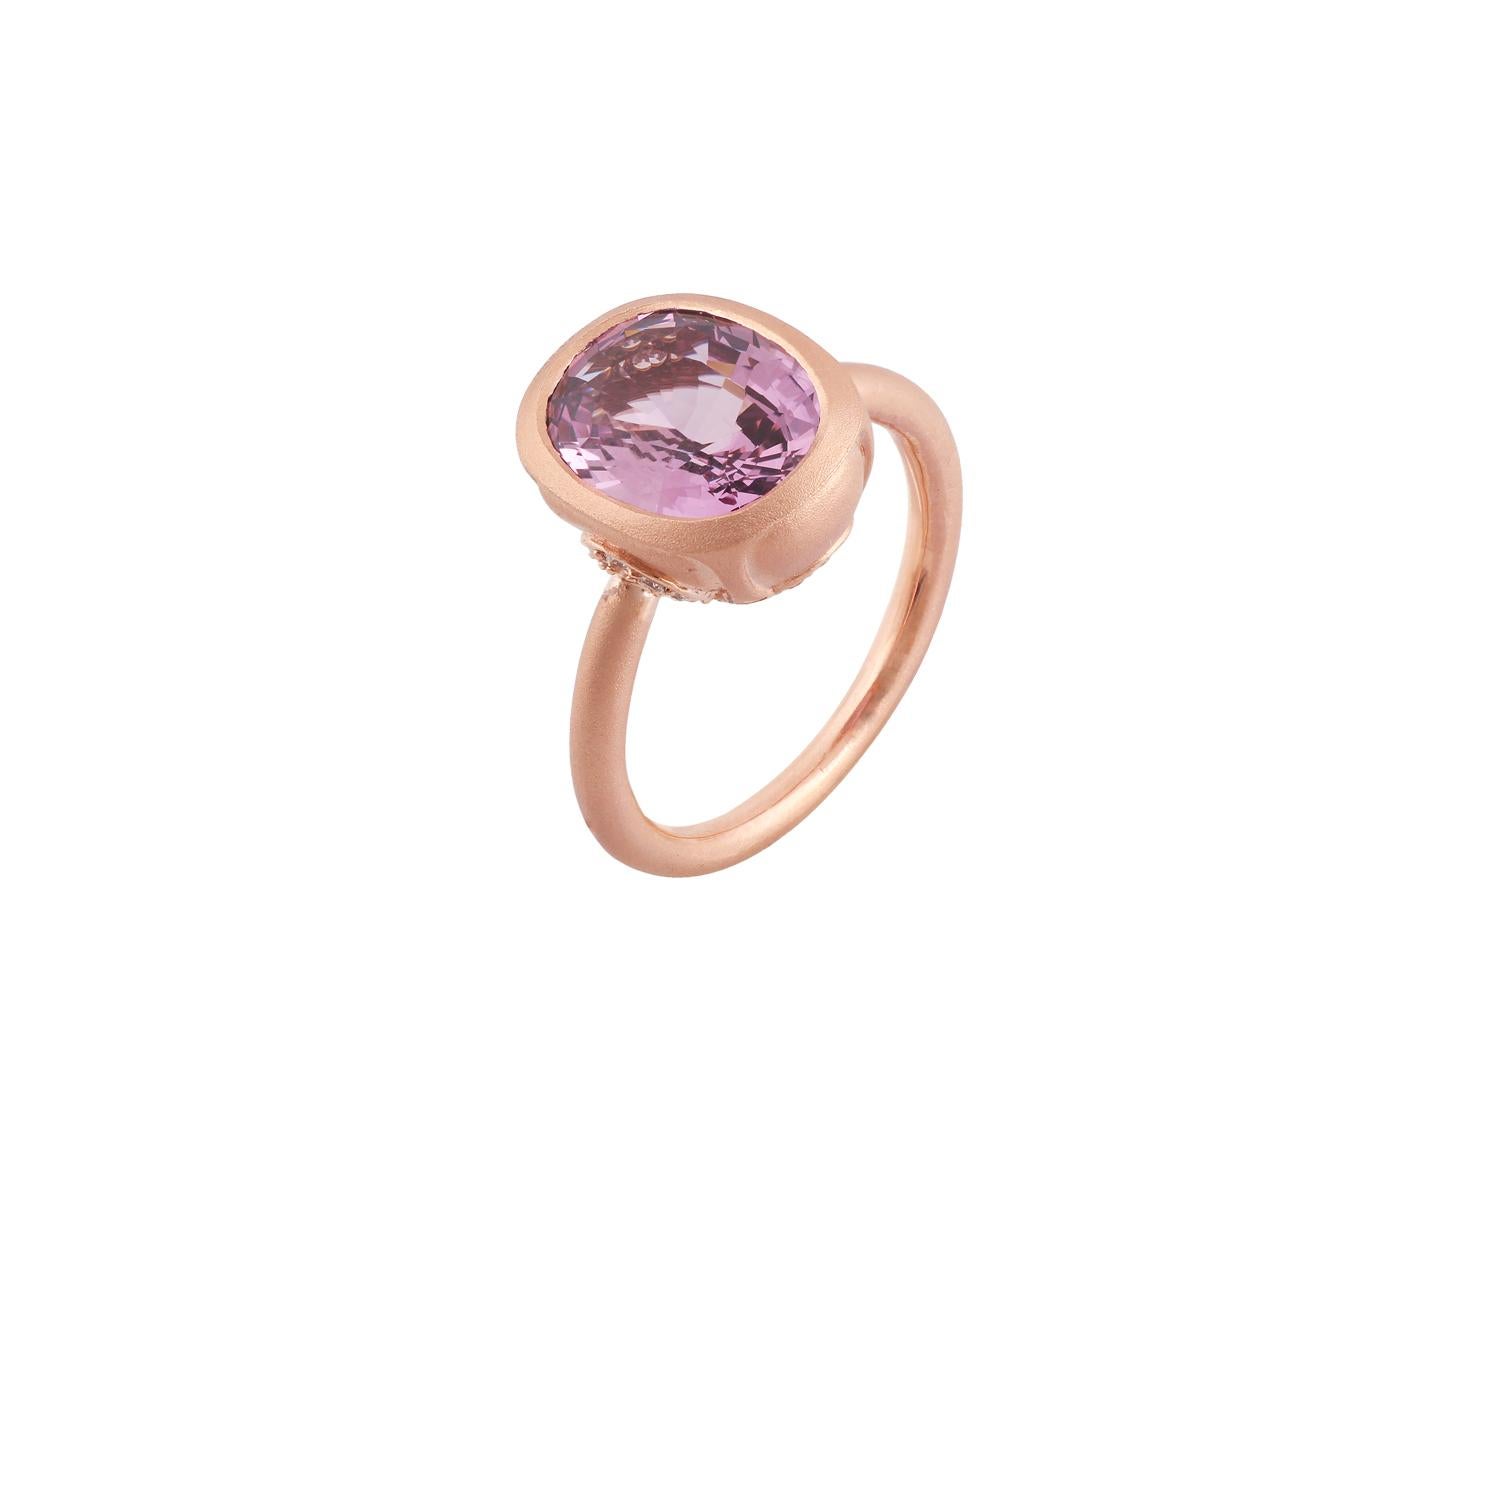 Contemporary Sri Lanka Natural Spinel & Diamond Surrounded By Matte Finish 18k Rose Gold Ring For Sale